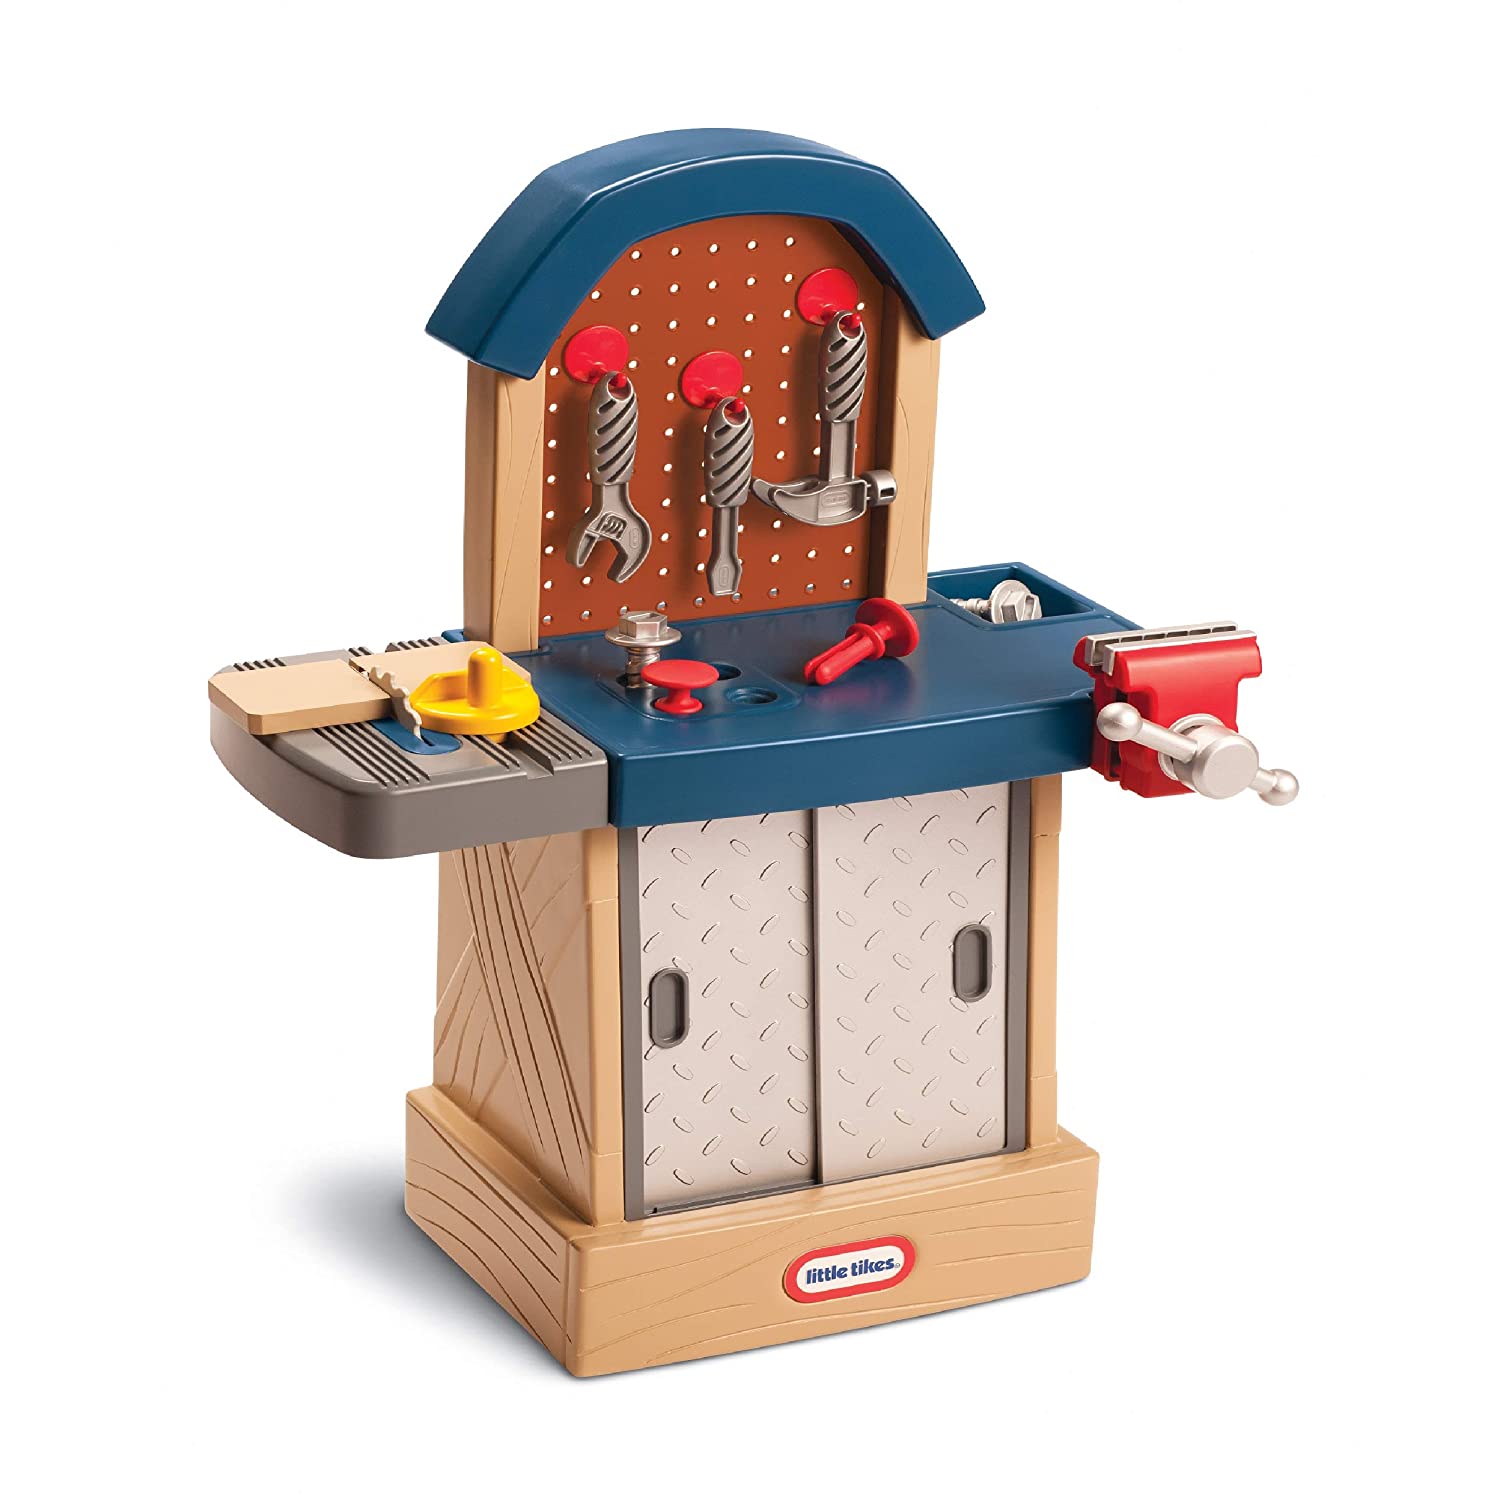 Top 9 Best Kids Toy Tool Bench Reviews in 2023 9